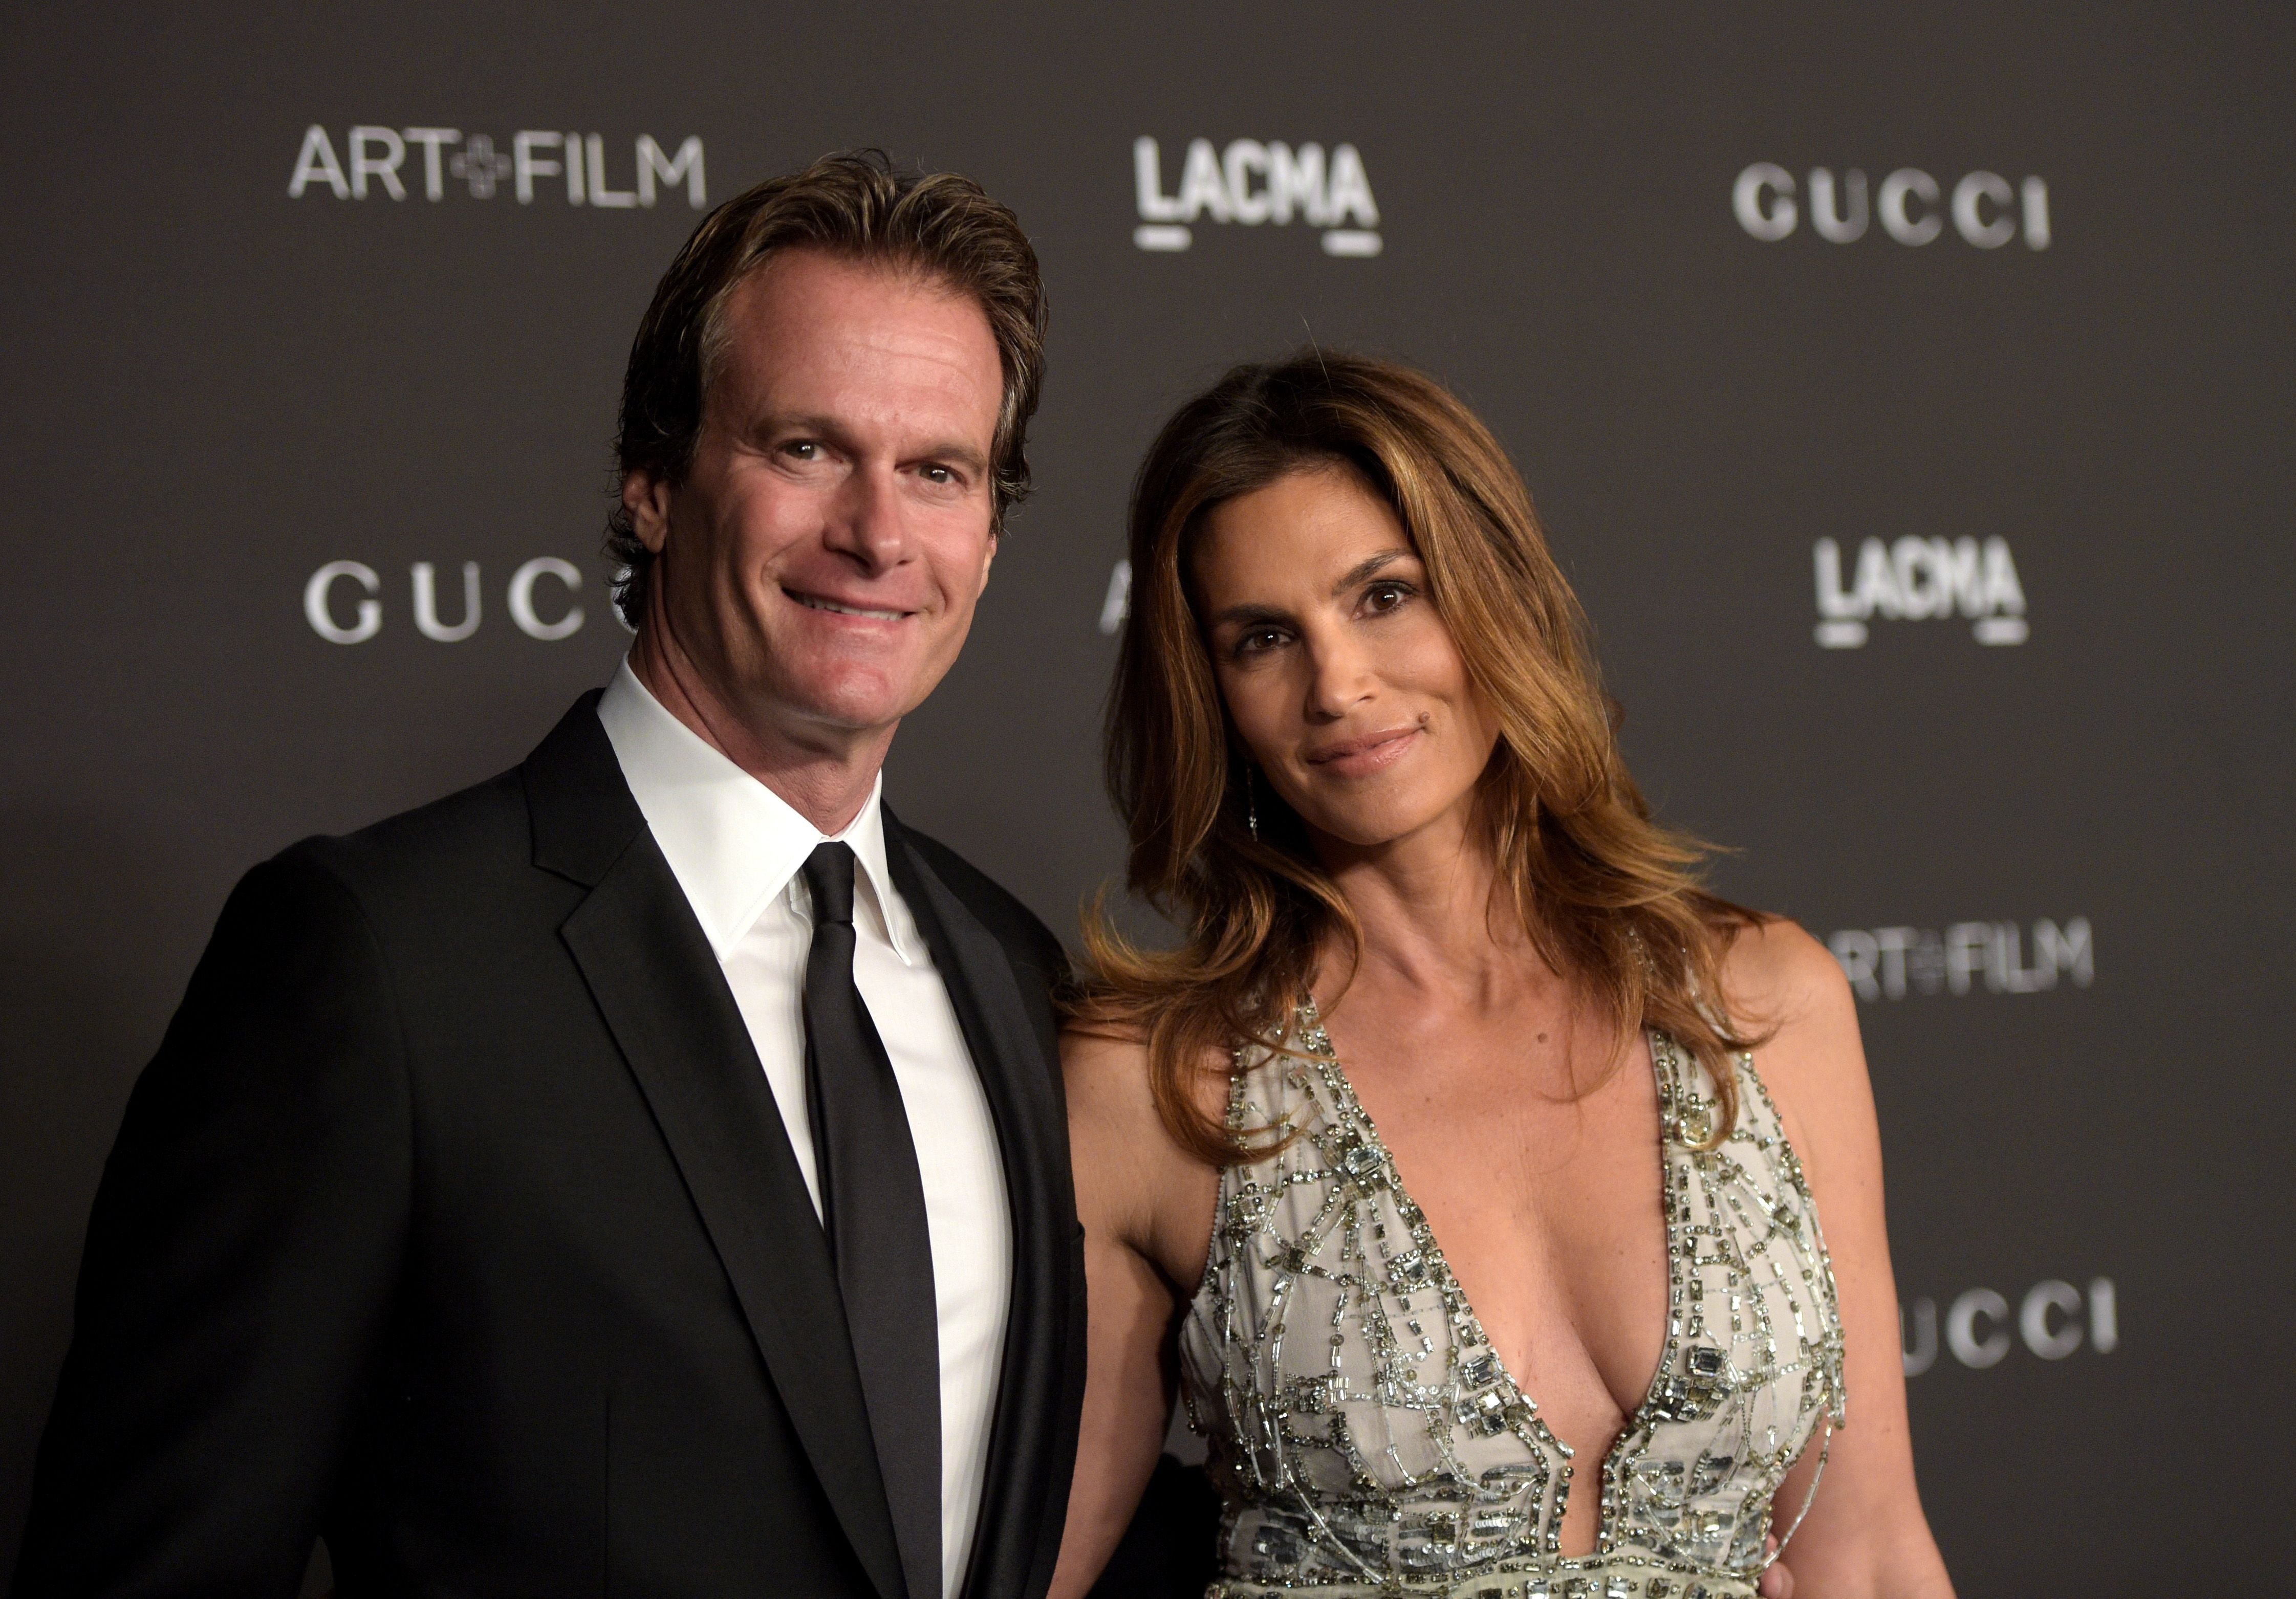 Cindy Crawford and Rande Gerber at the 2014 LACMA Art + Film Gala on November 1, 2014 in Los Angeles, California | Photo: Getty Images 